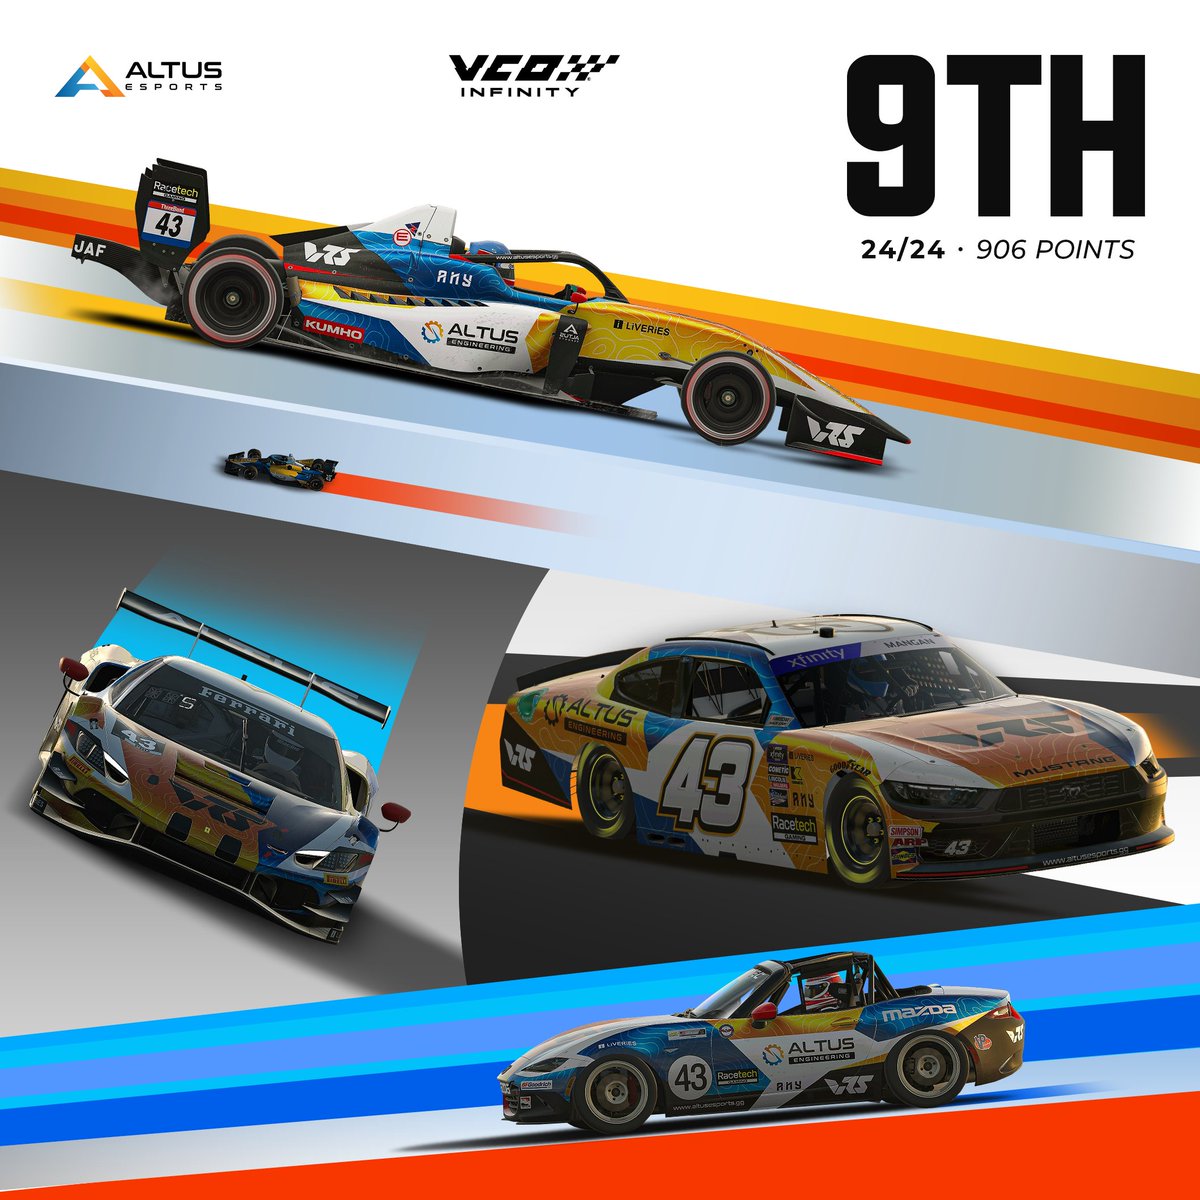 After 24 races, we ended #vcoinfinity in 9th place 🏁 Solid results from all drivers despite a few misfortunes. We had a blast nonetheless and can’t wait for the next one! 🙌 #WeAreAltus @vcoesports @iRacing